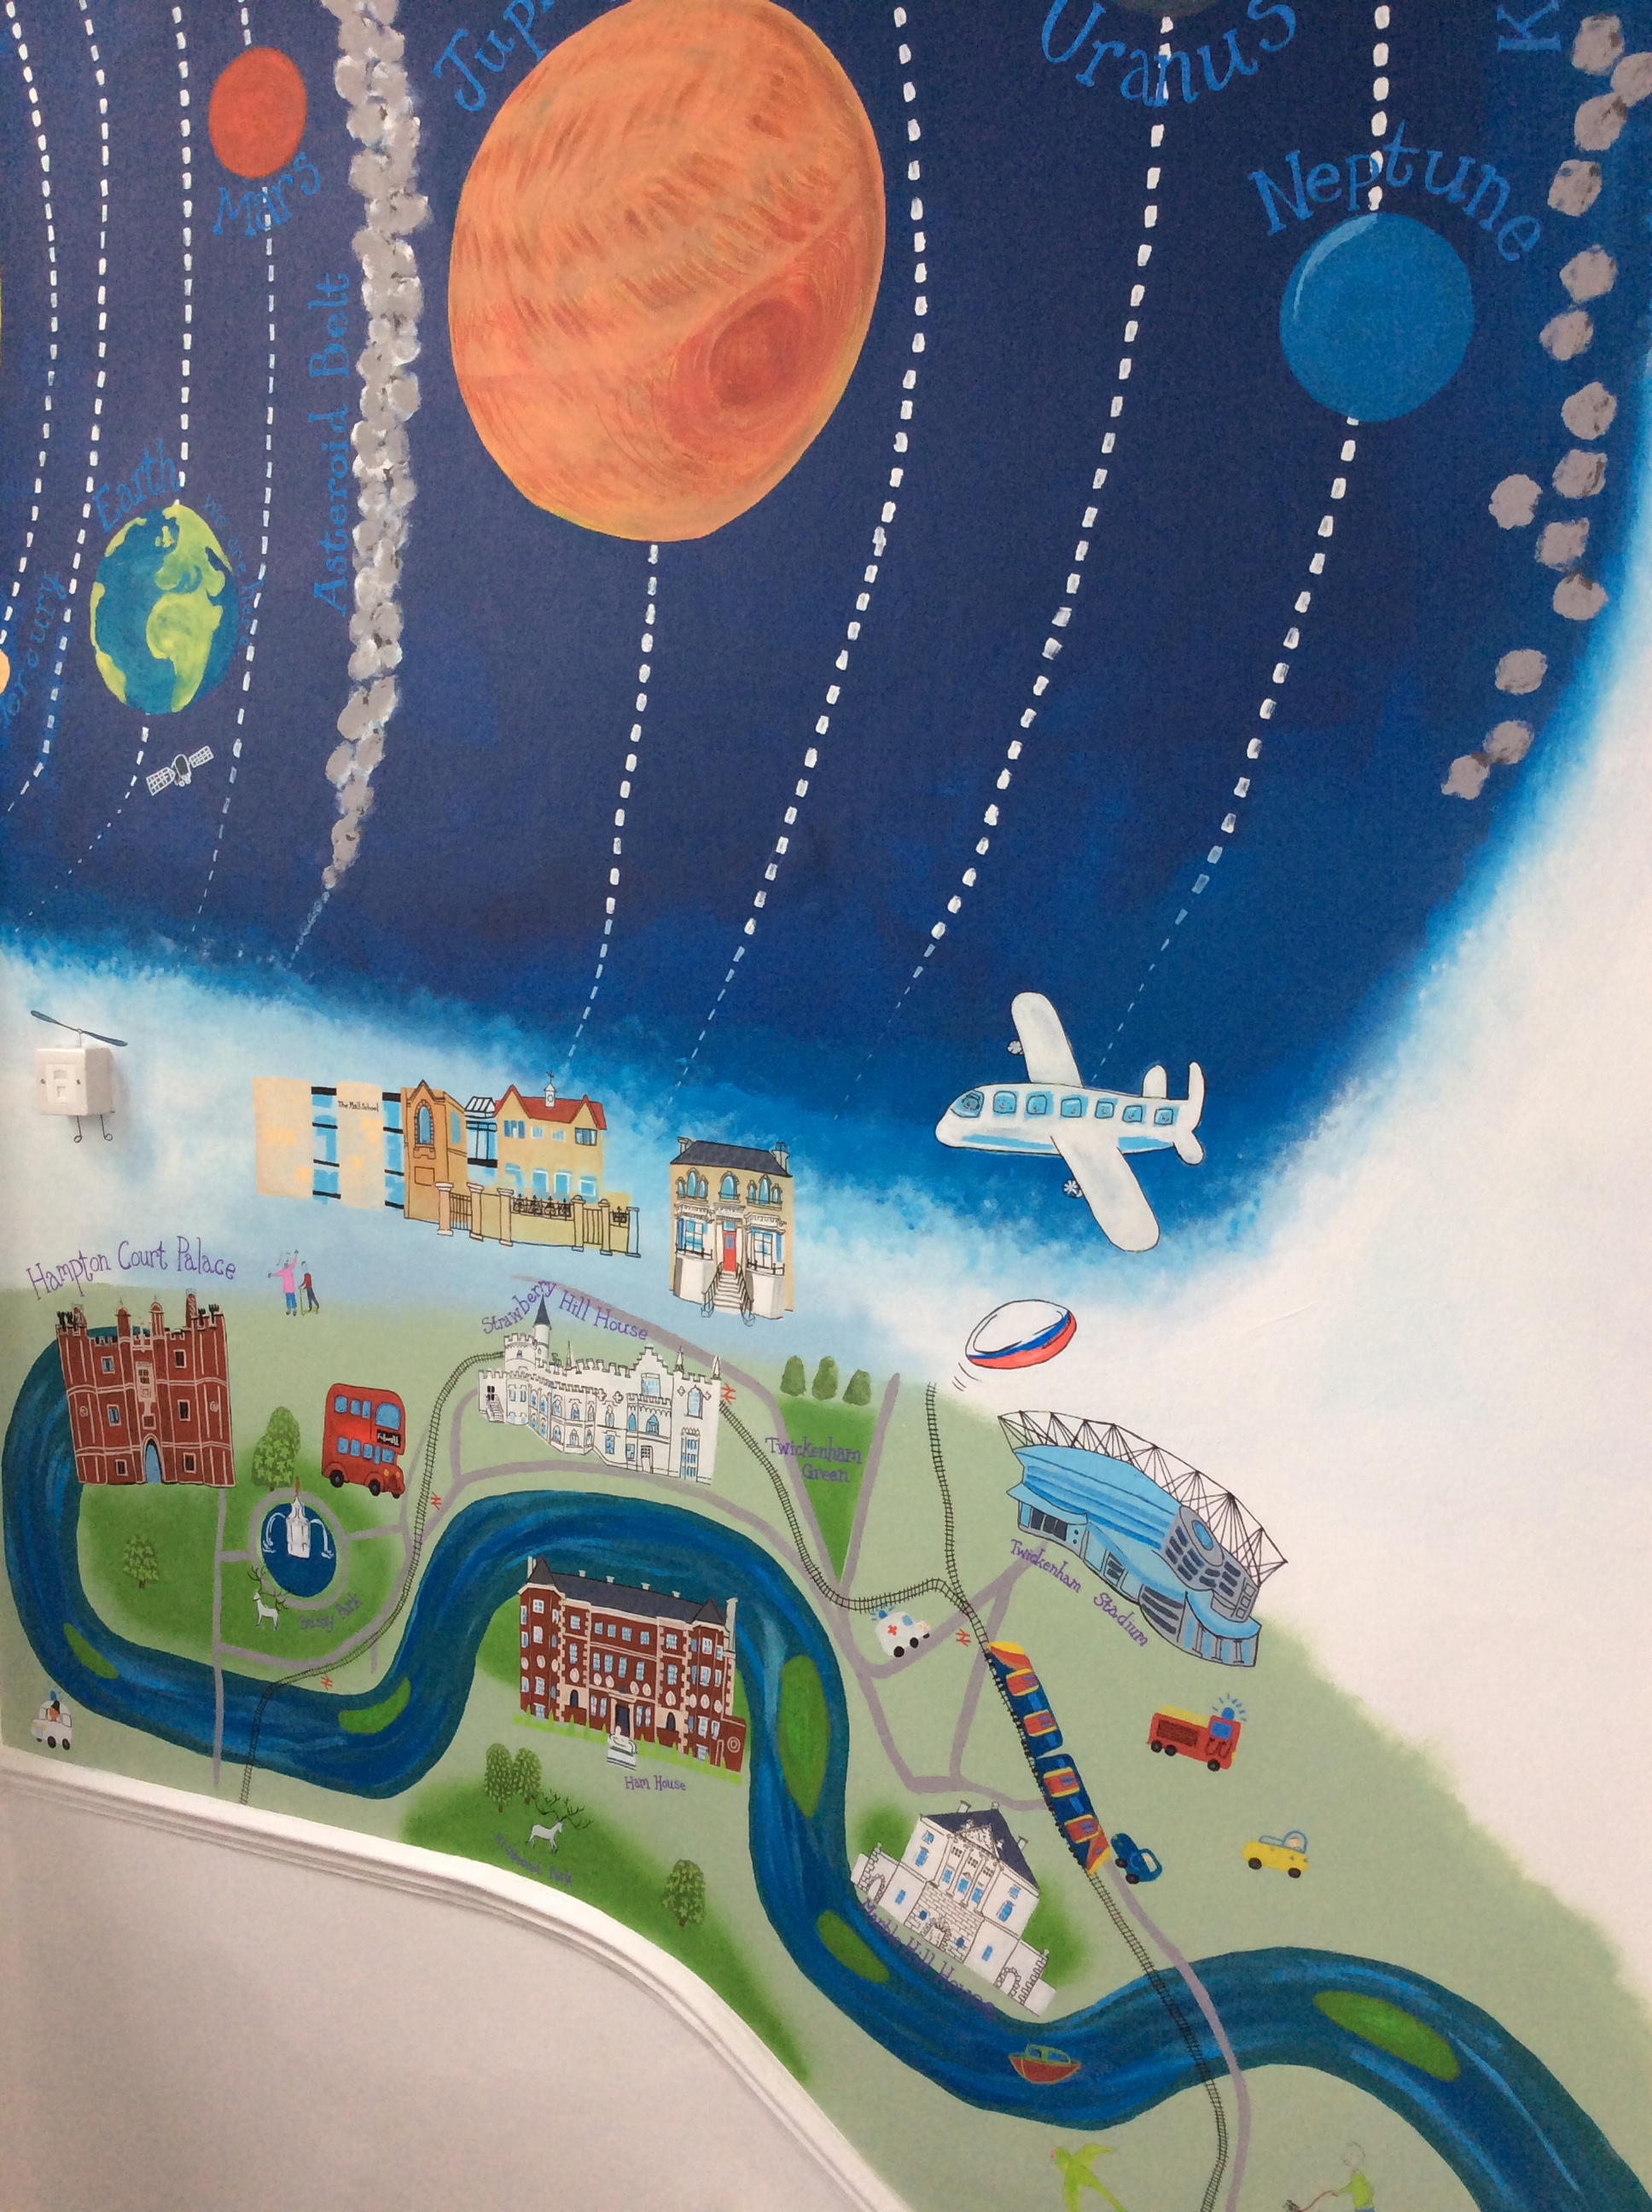 Section of a hand-painted mural at The Mall School